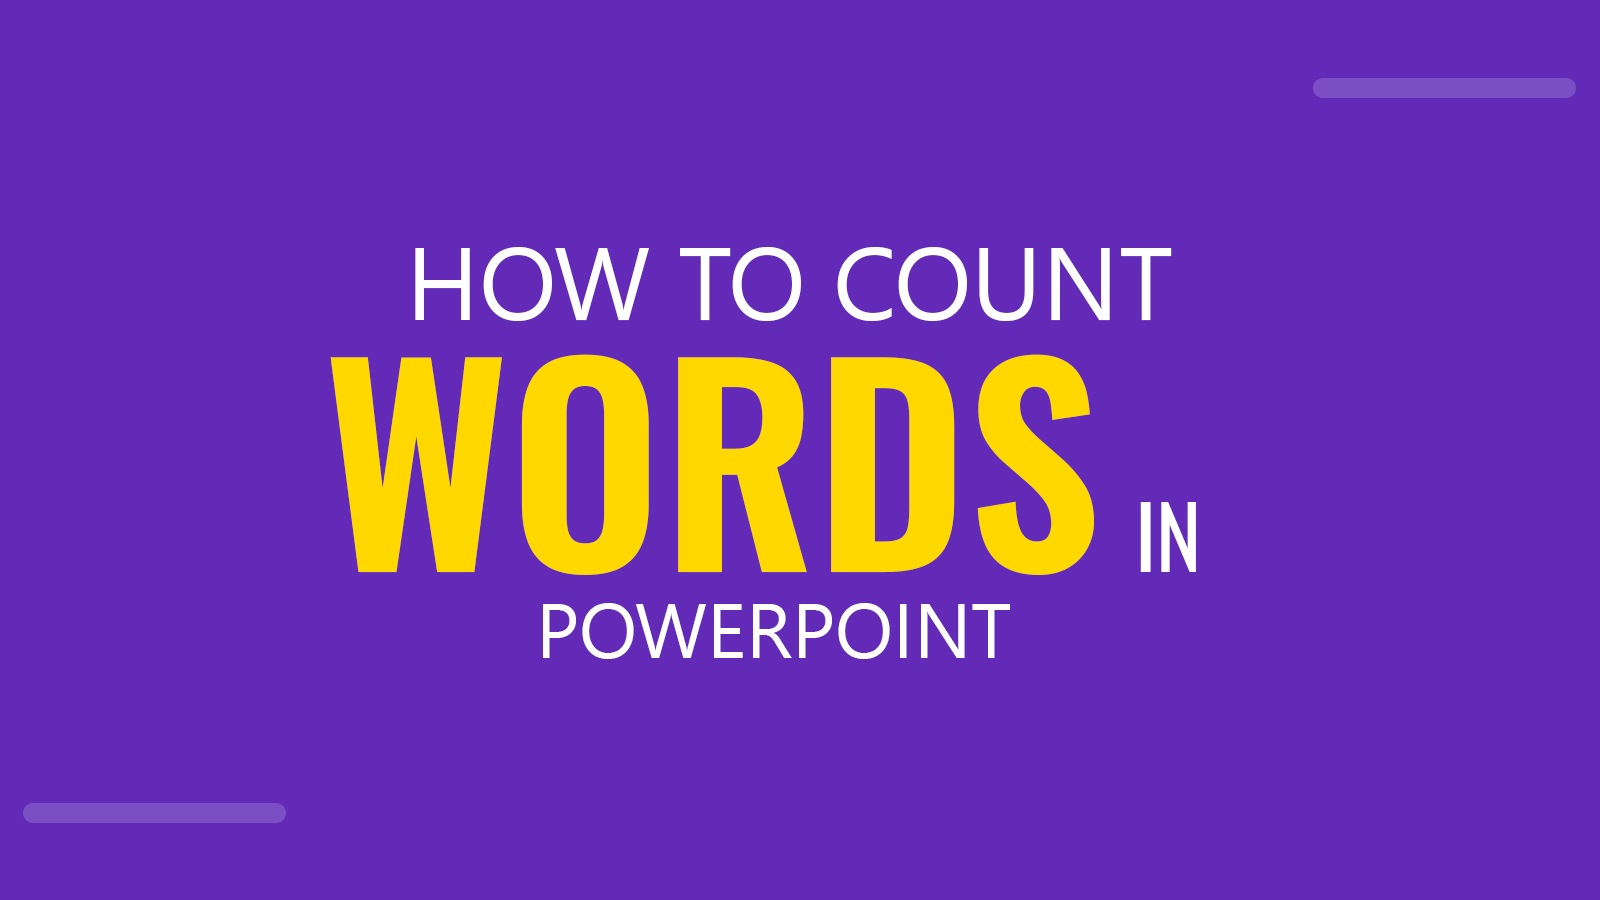 How to Count the Number of Words used in a PowerPoint Presentation